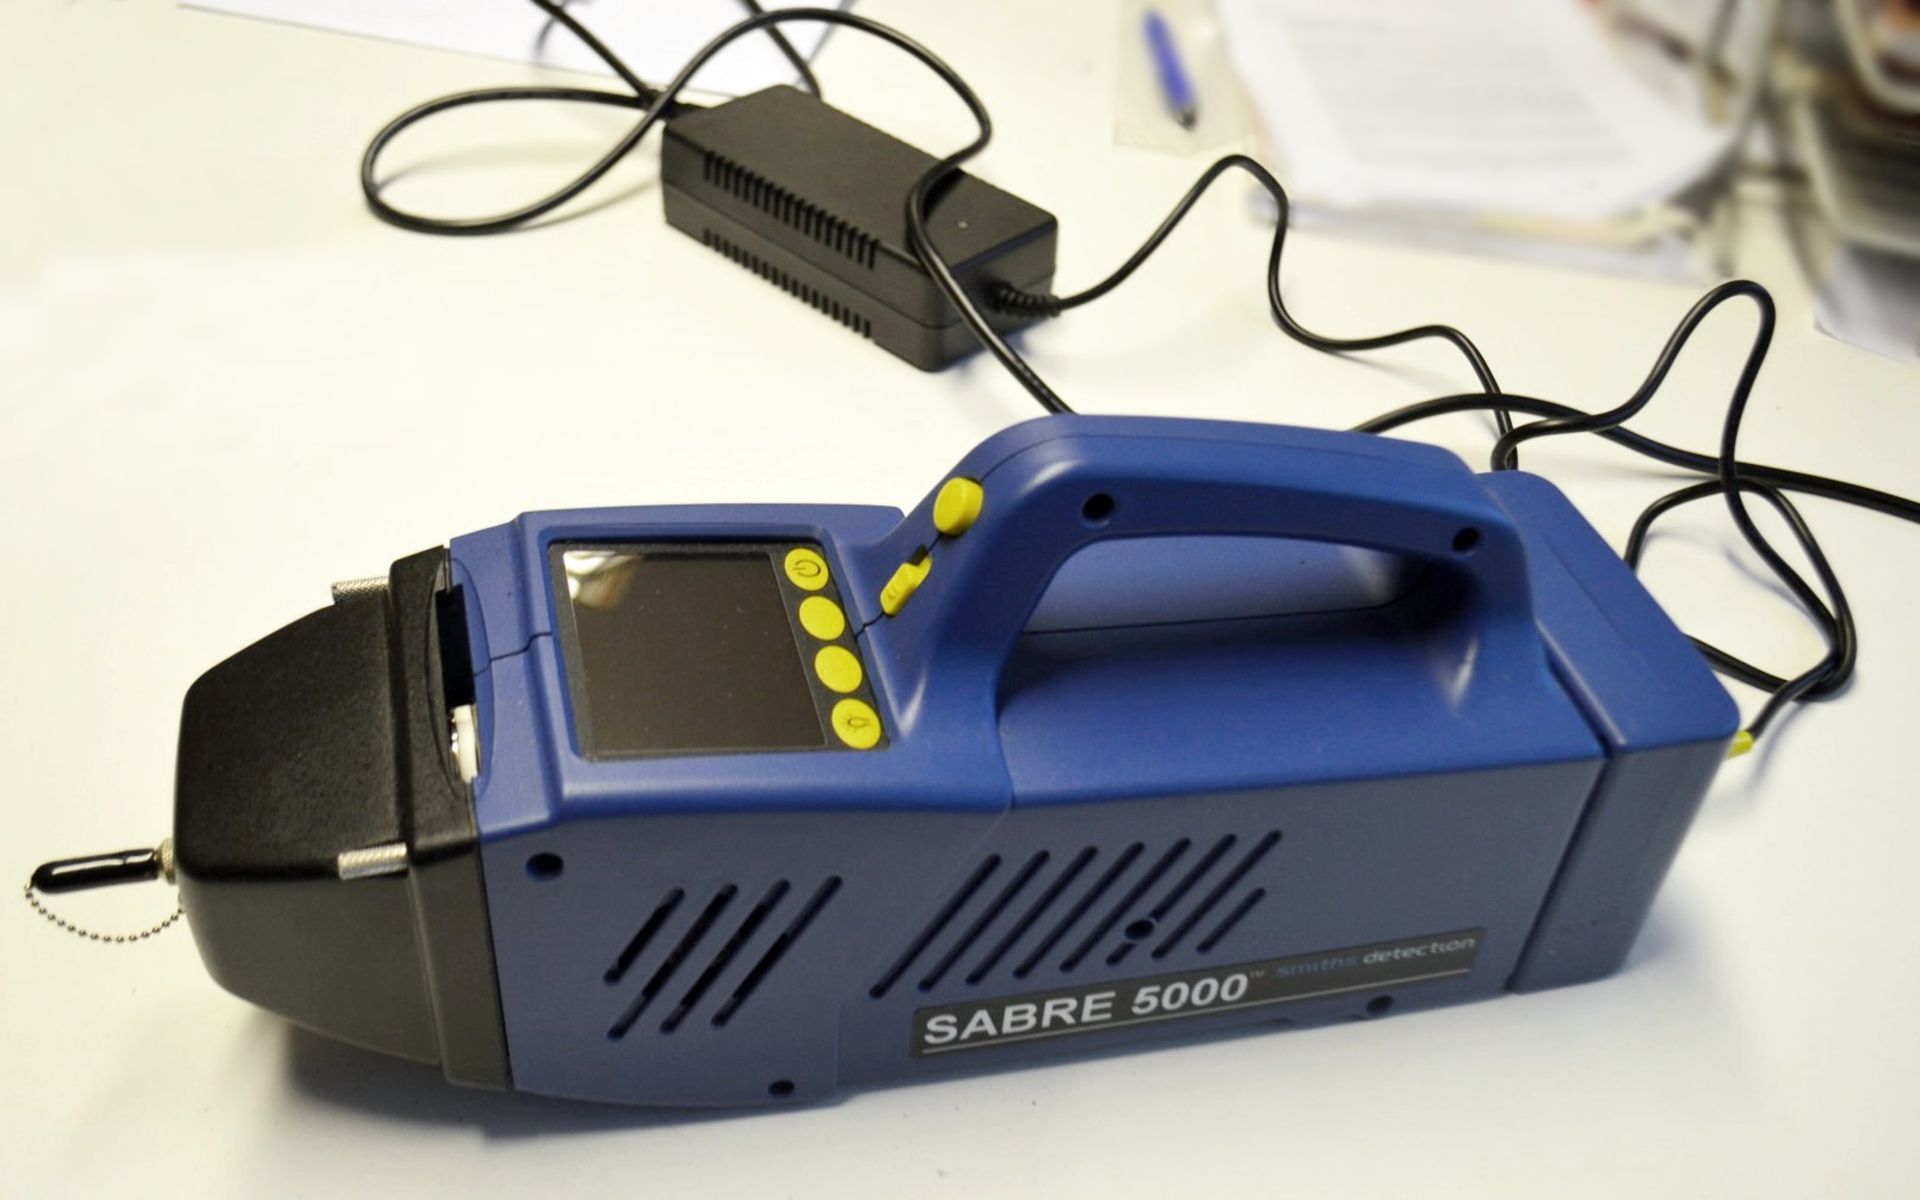 1 x SABRE™ 5000 Handheld Trace Detector - For Explosives, Chemical Agents And Toxic Chemicals - Image 5 of 31